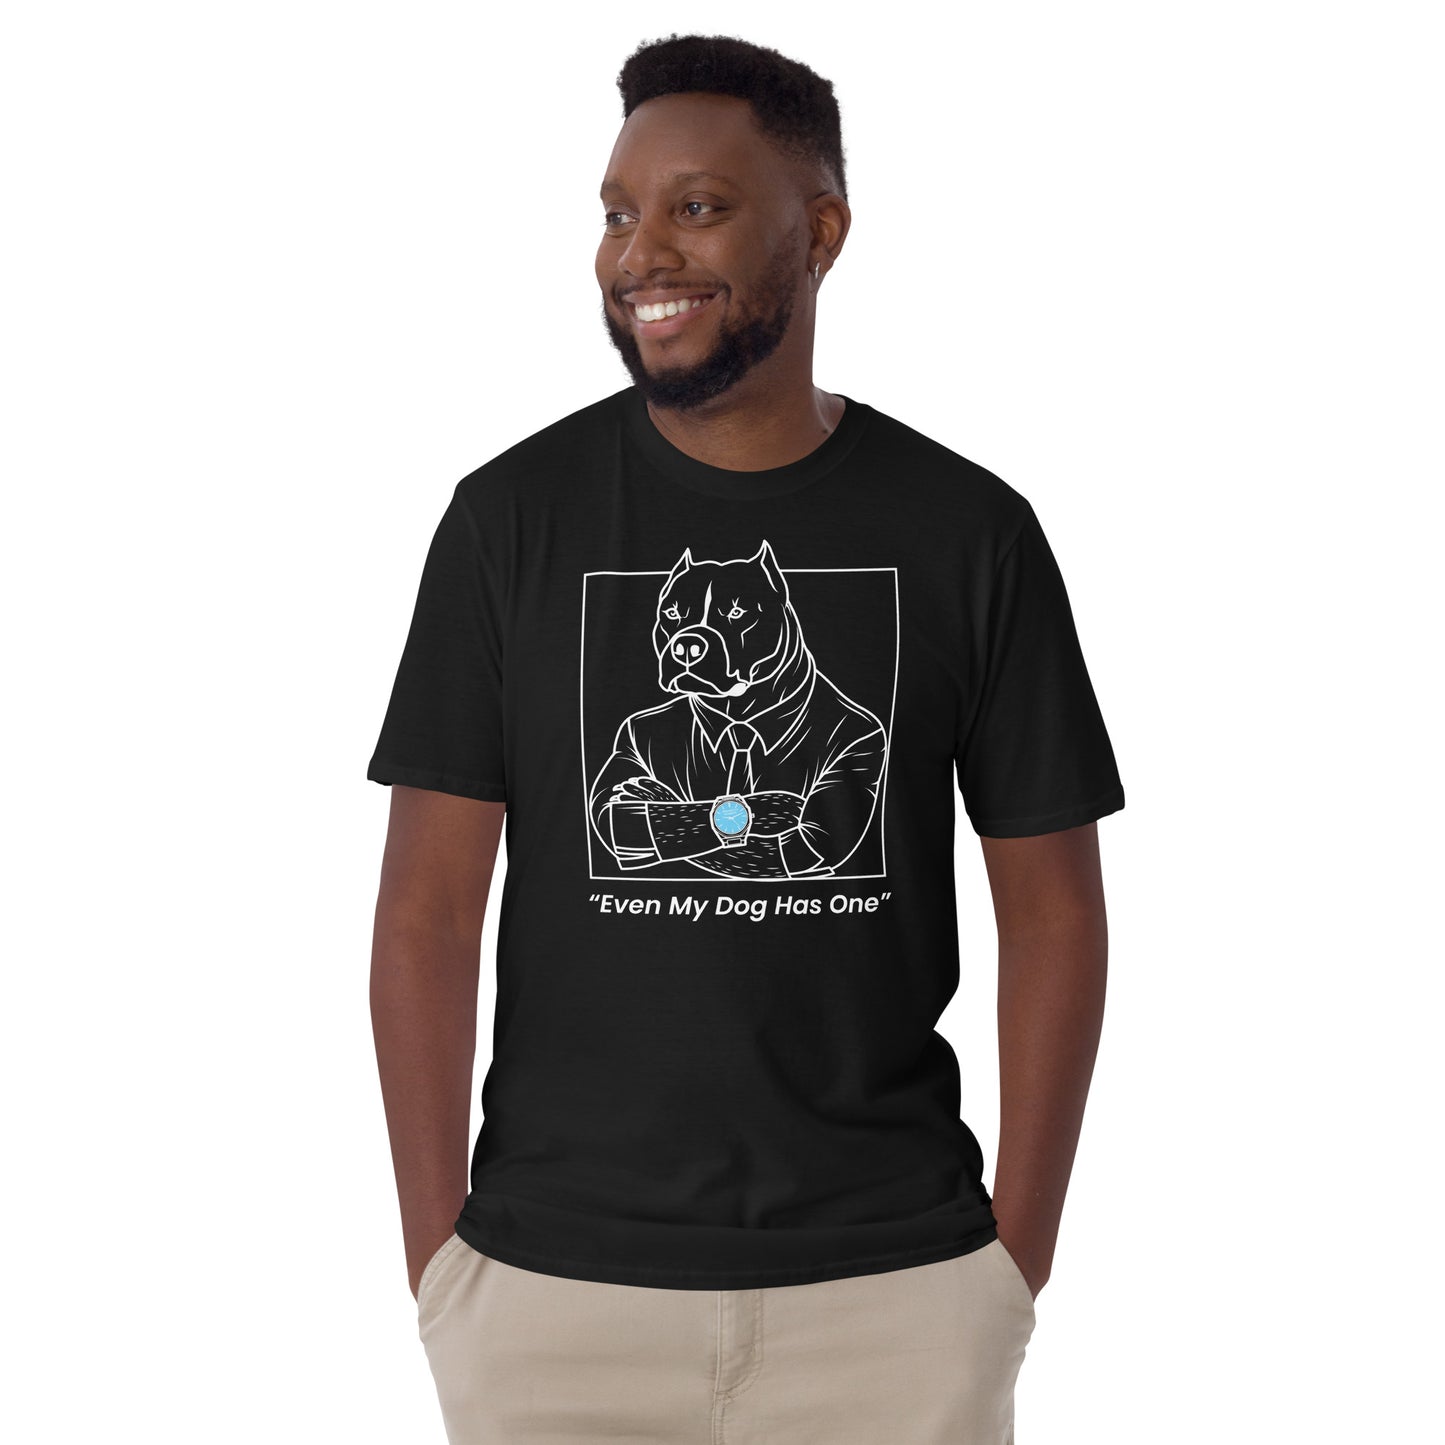 "Even My Dog Has One" T-Shirt